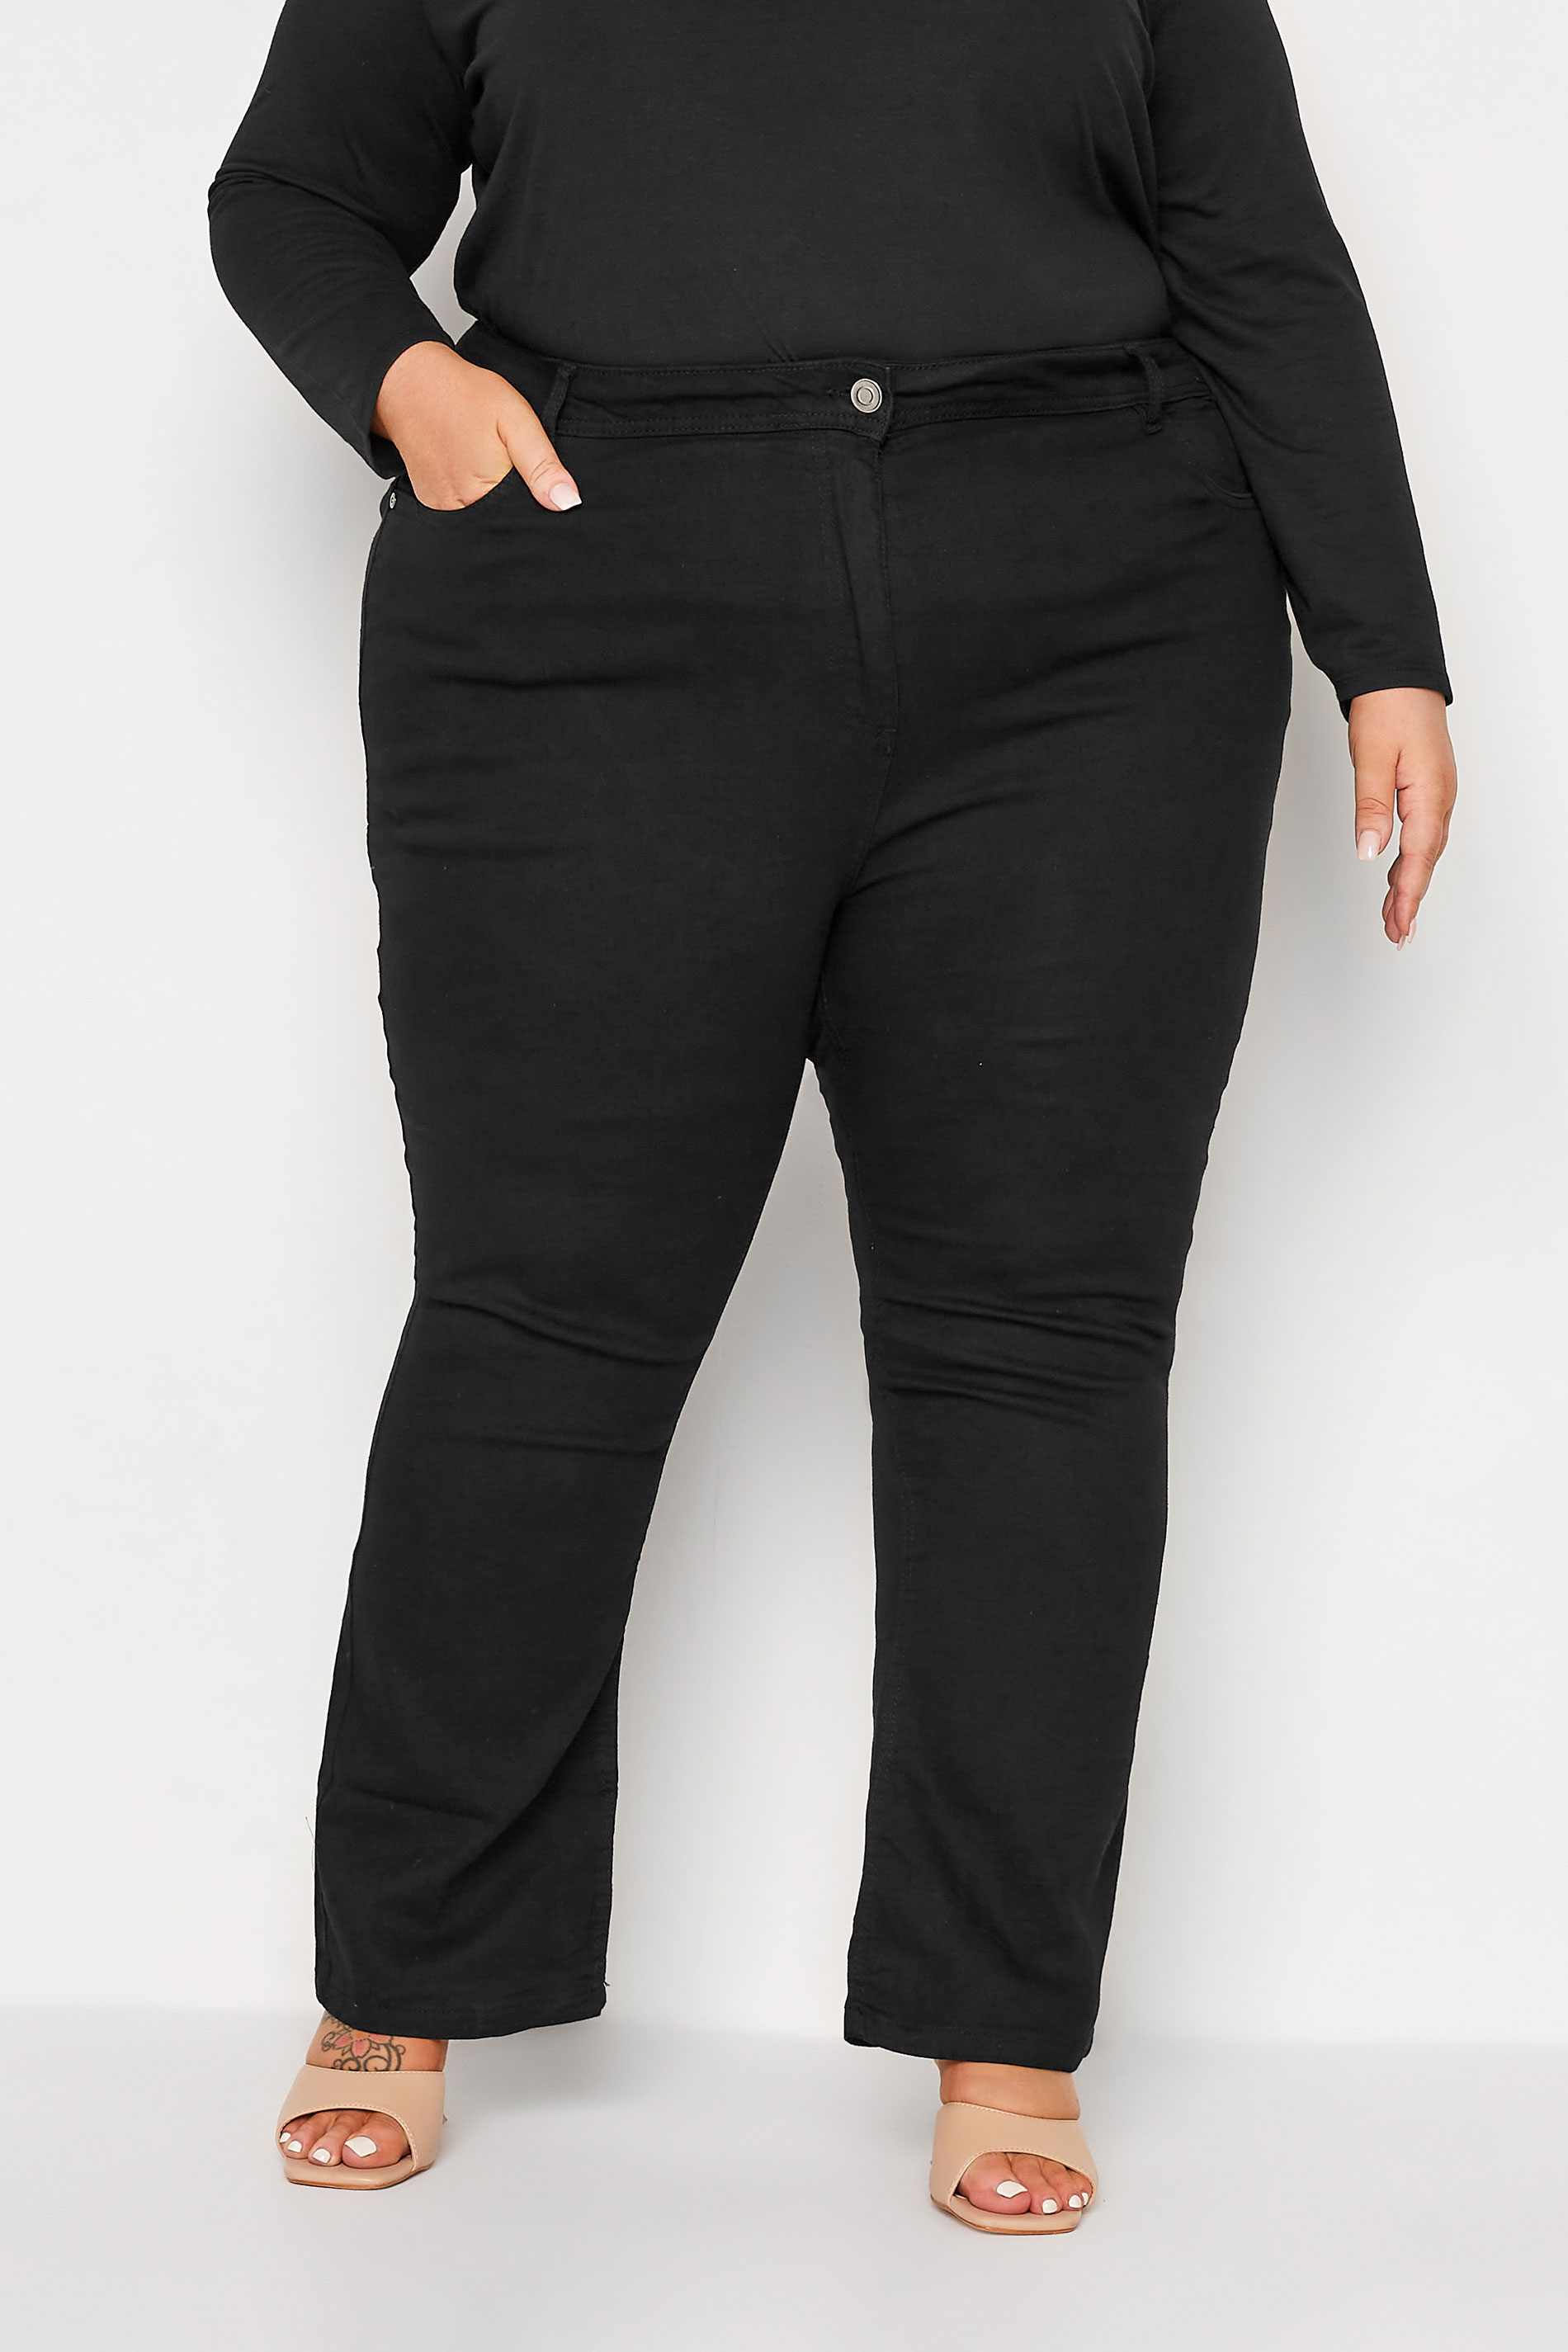 Plus Size Black Straight Leg Fit Stretch RUBY Jeans | Yours Clothing 1